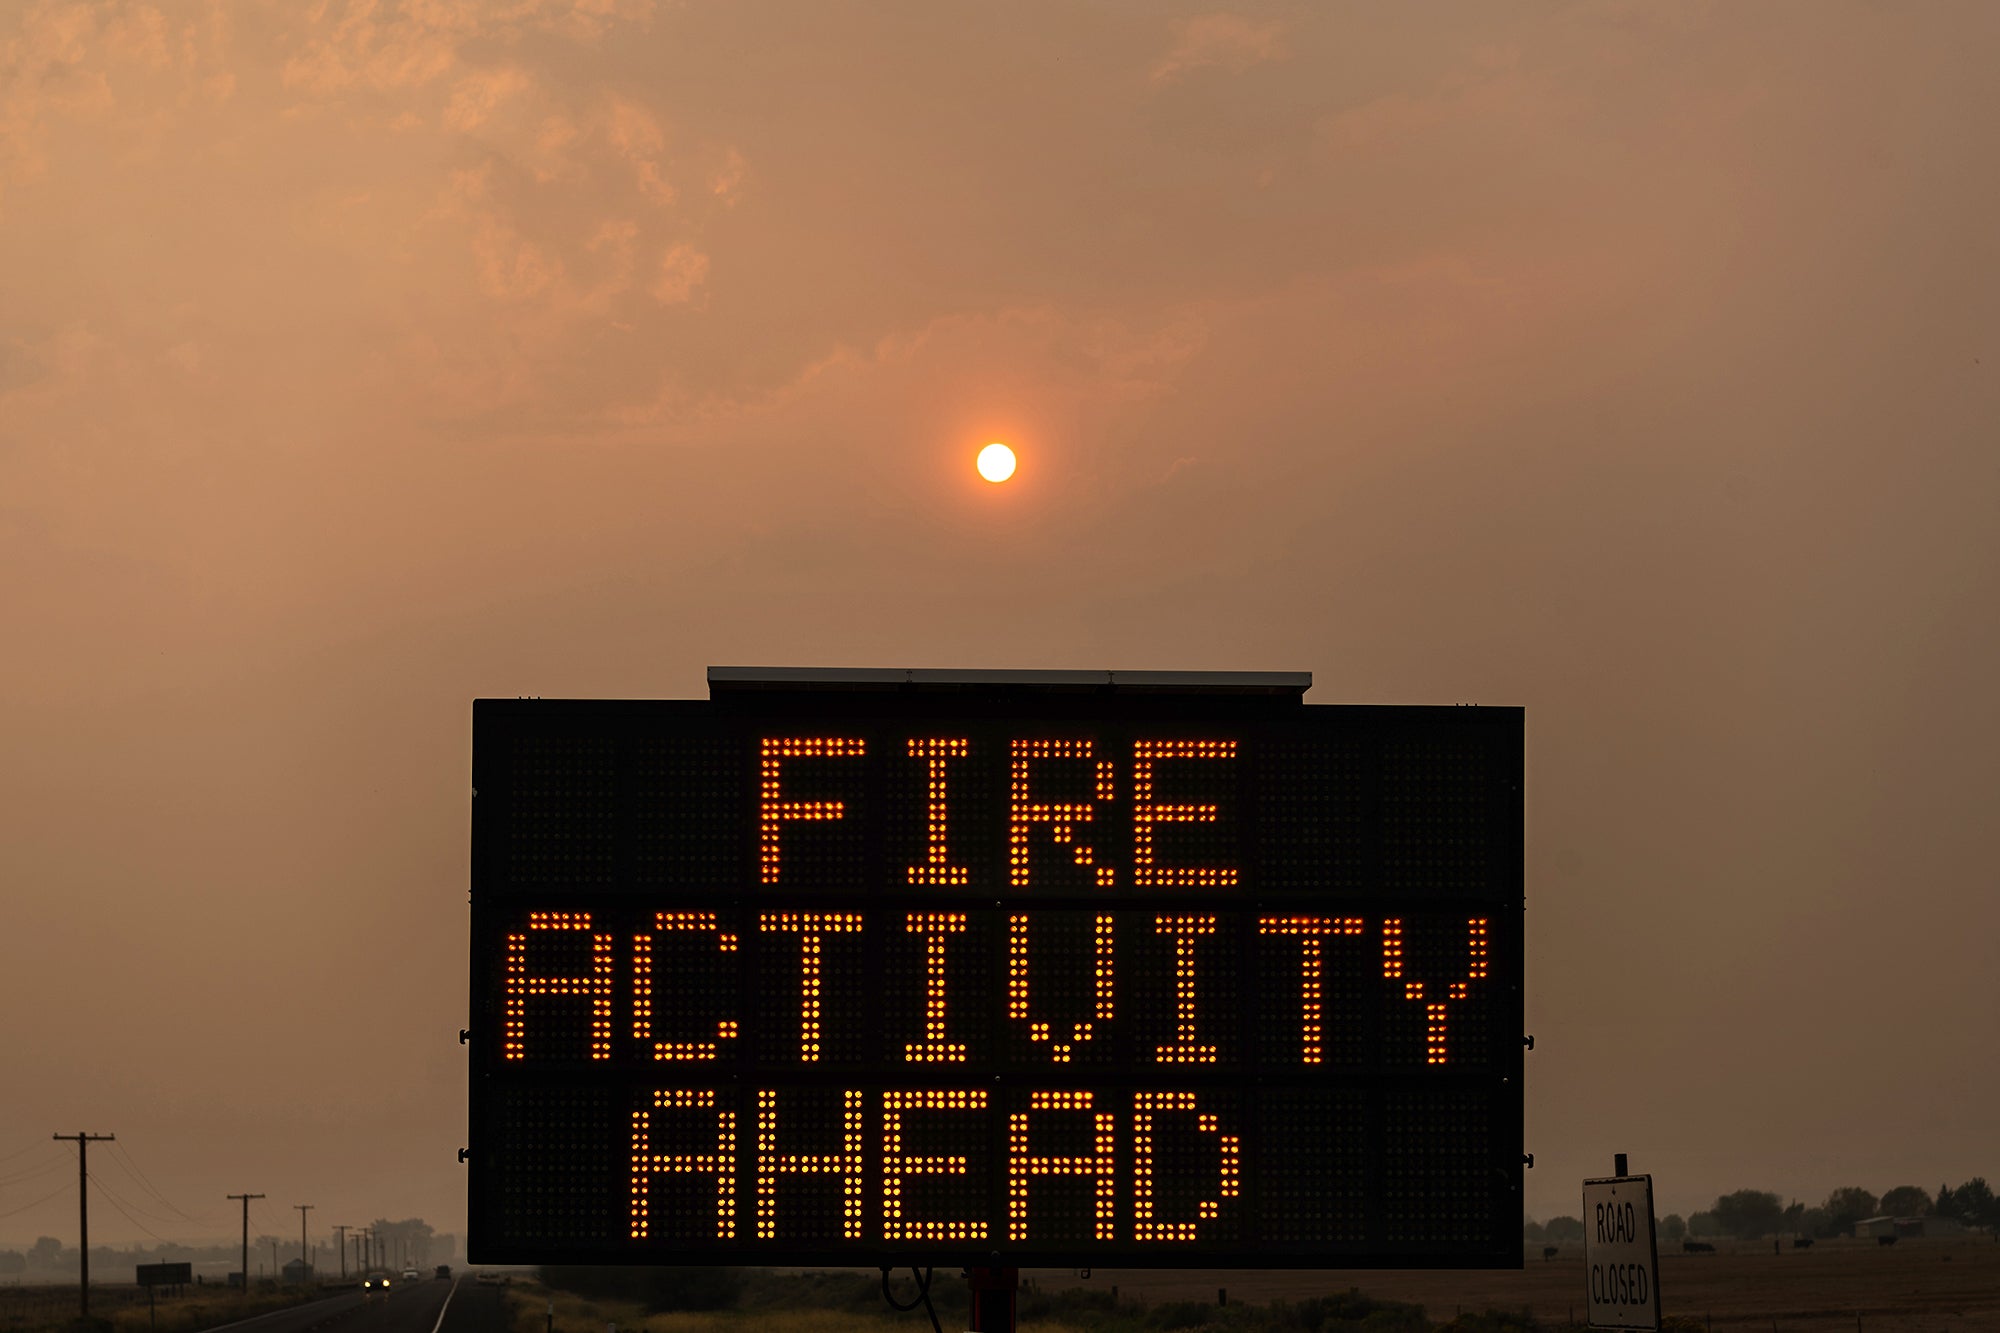 A highway sign reads, "FIRE ACTIVITY AHEAD," in the foreground, the landscape, sky, and sun in the background can be seen shrouded with heavy wildfire smoke, causing a warm, orange tint to be cast